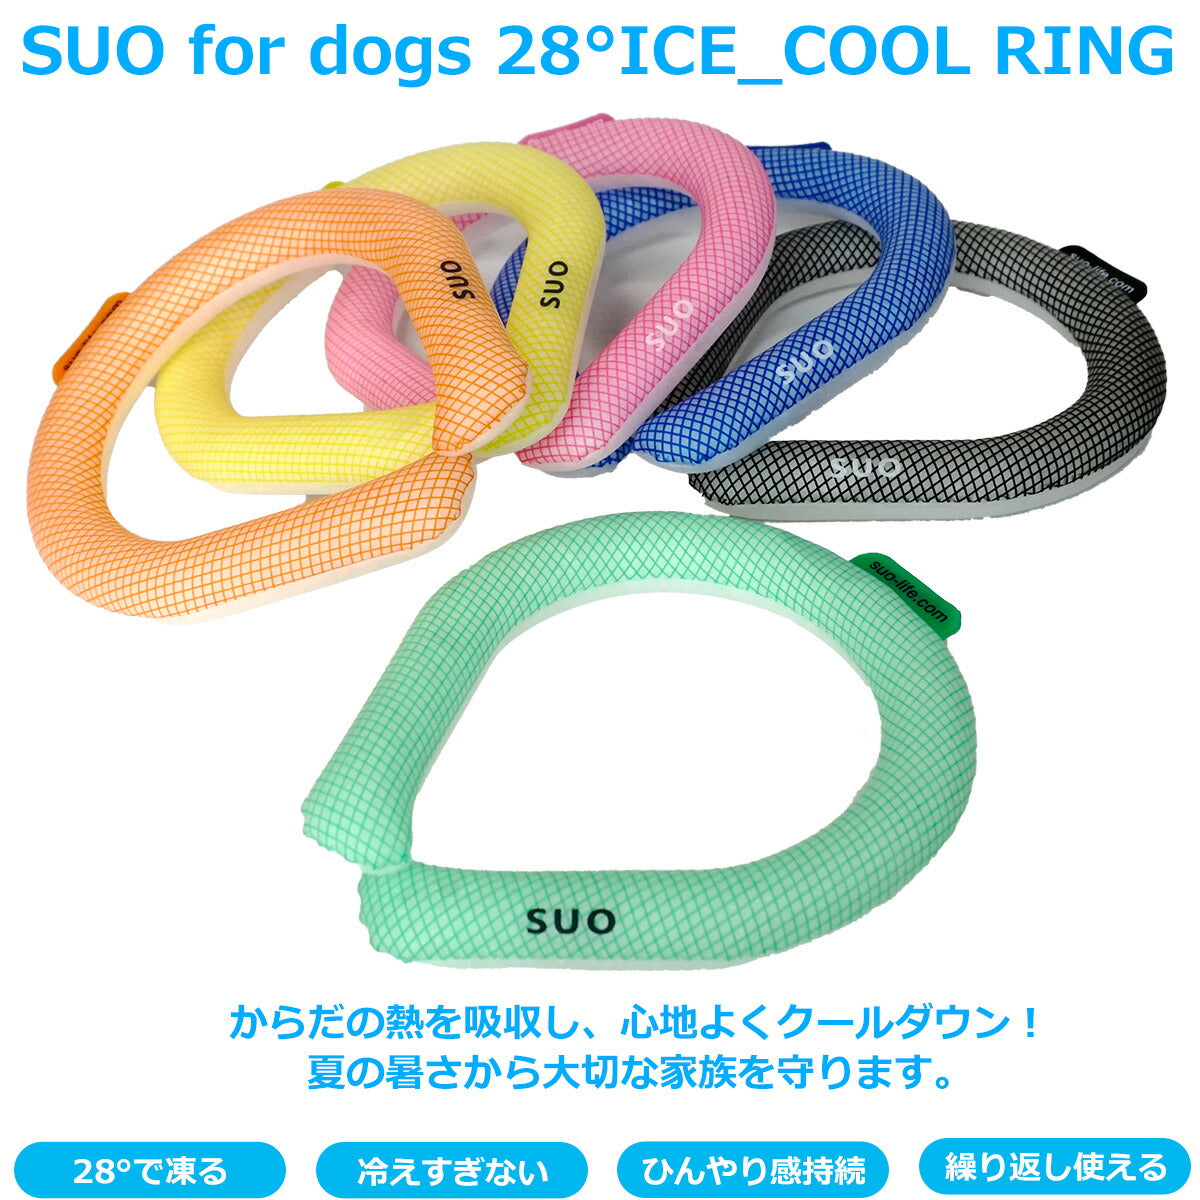 SUO for dogs 28°ICE SUOリング ボタンなし S オレンジ 熱中症対策グッズ 暑さ対策 ひんやり 首 冷感 犬 大人 子供